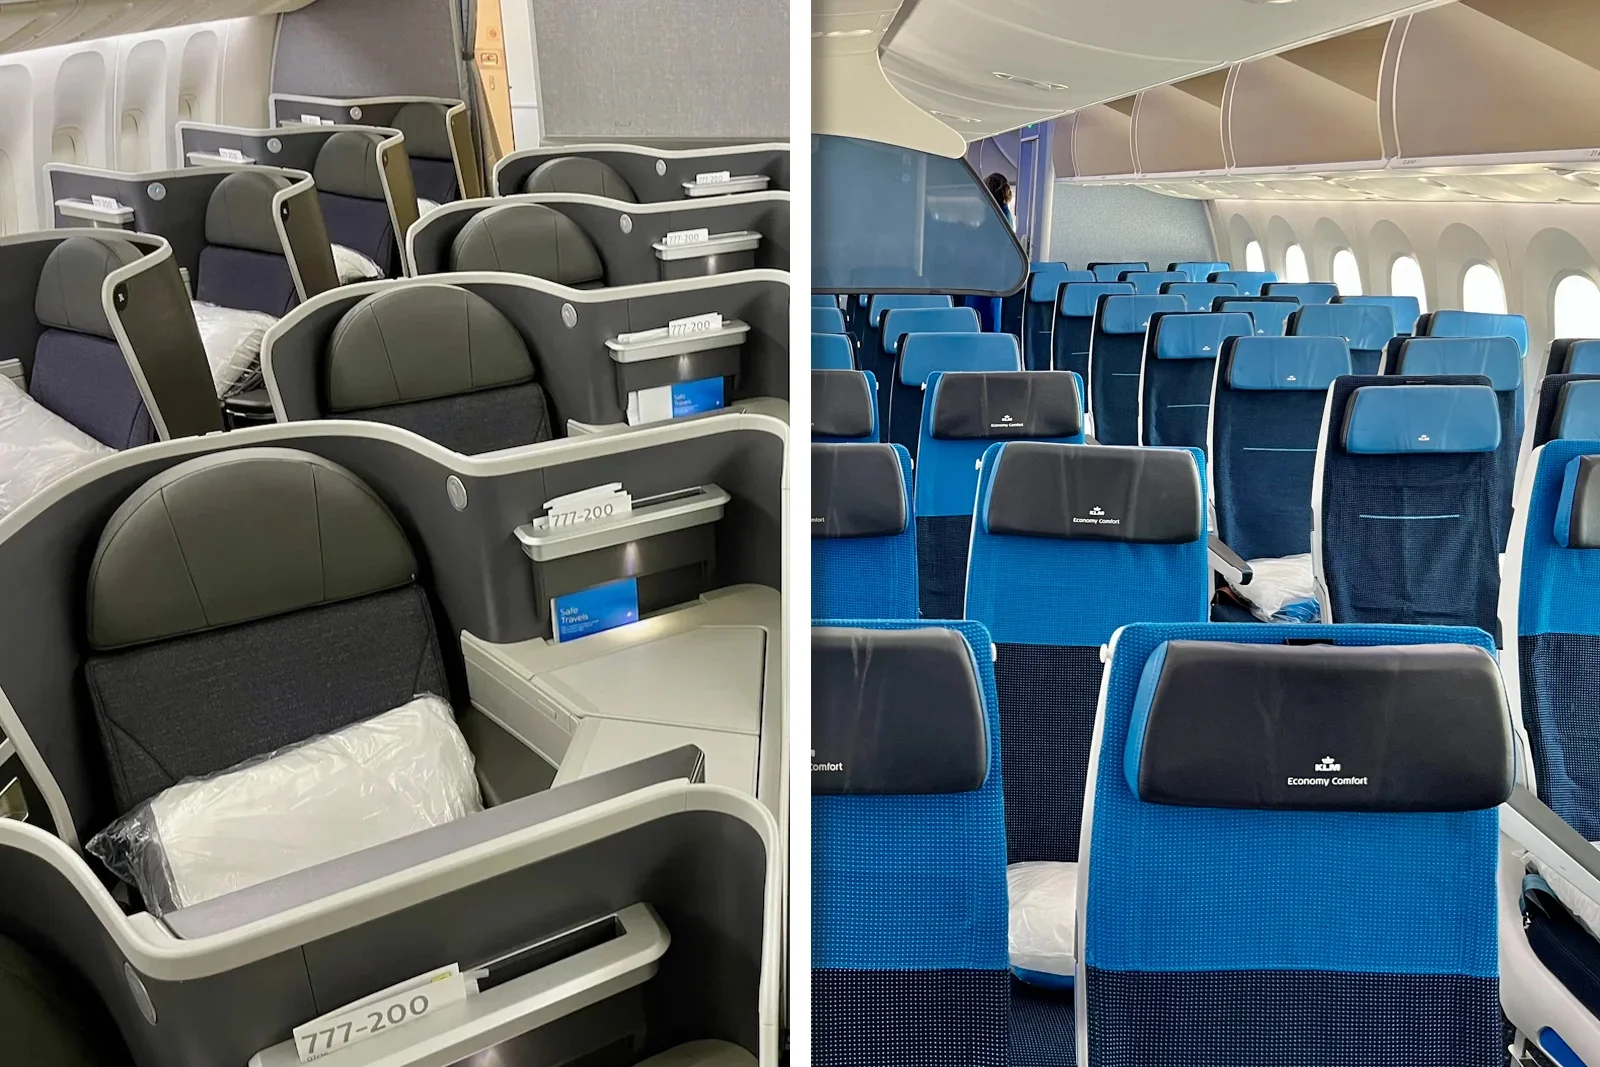 Are the distinctions between business class and a premium economy worth the extra money?